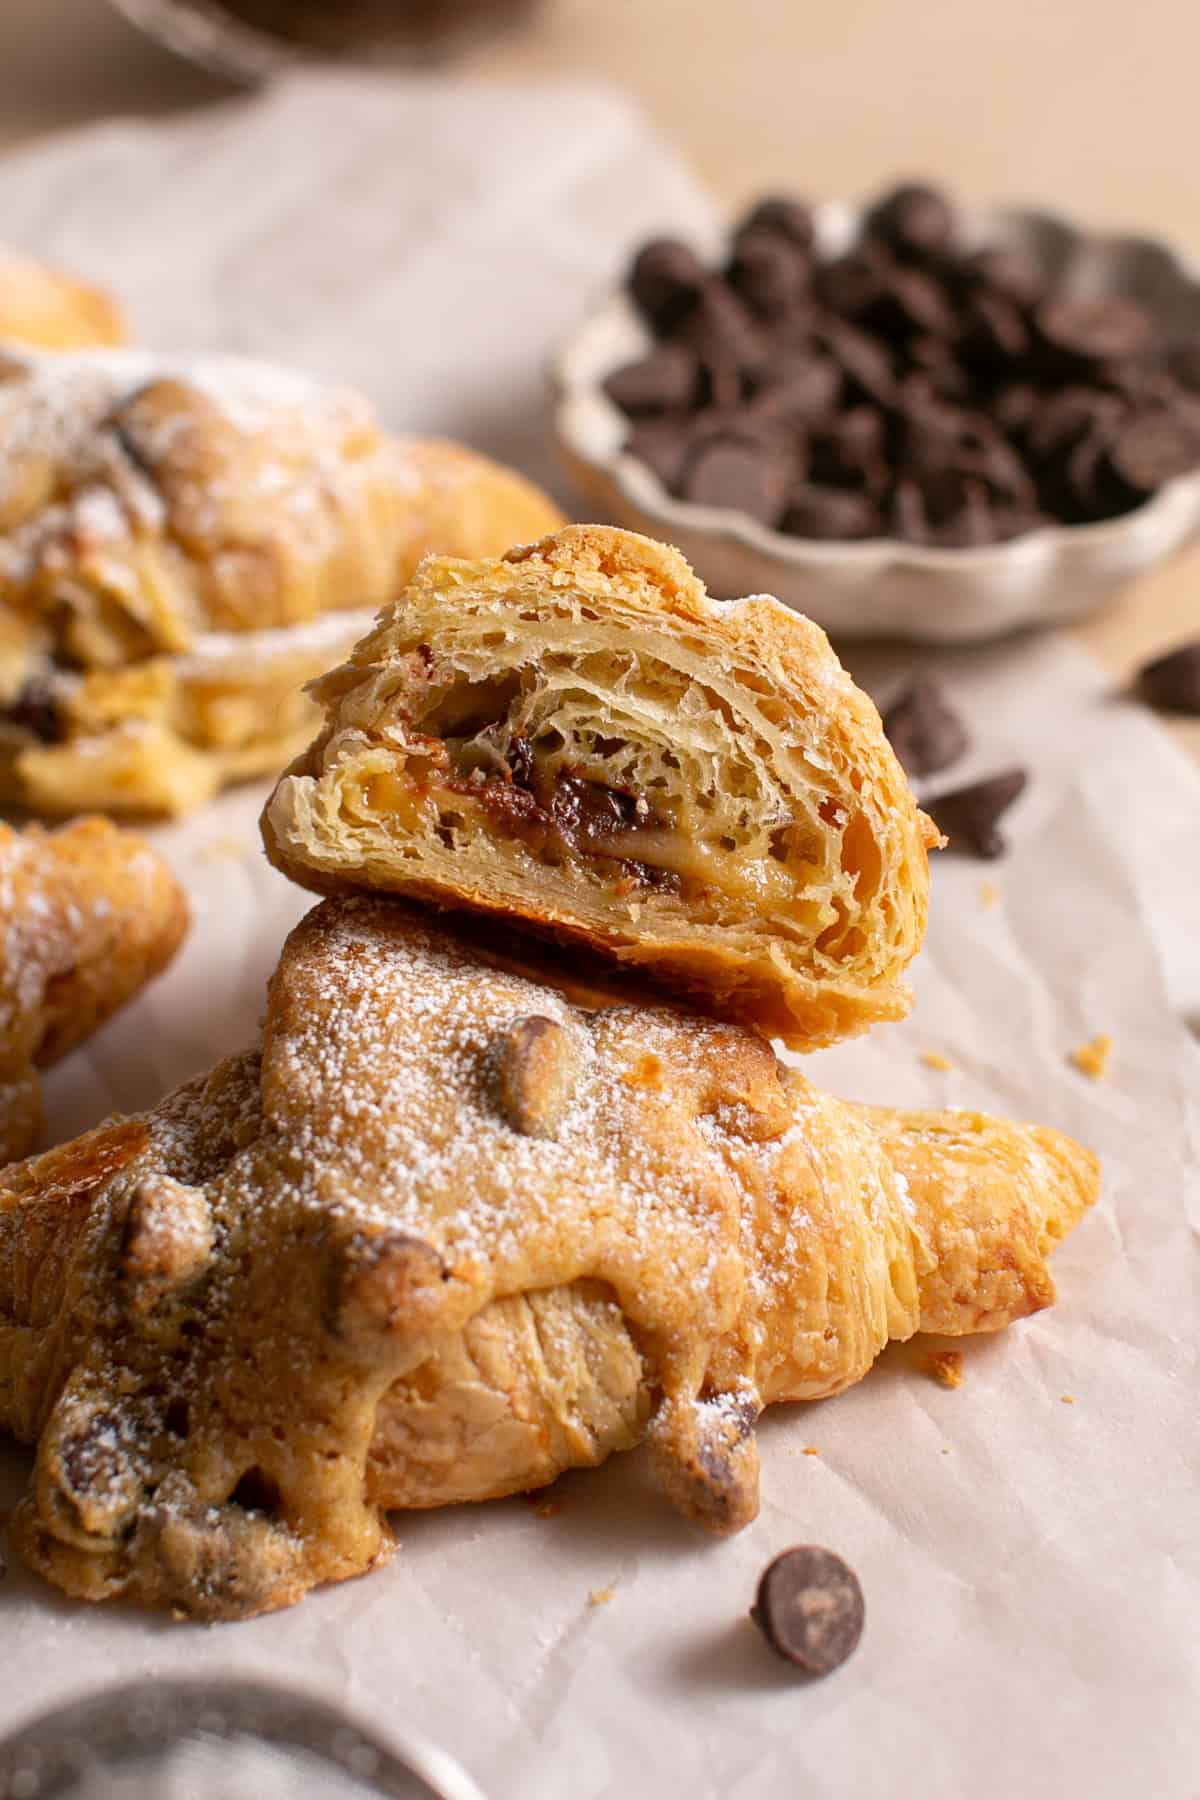 Chocolate Chip Cookie Croissant cut in half.